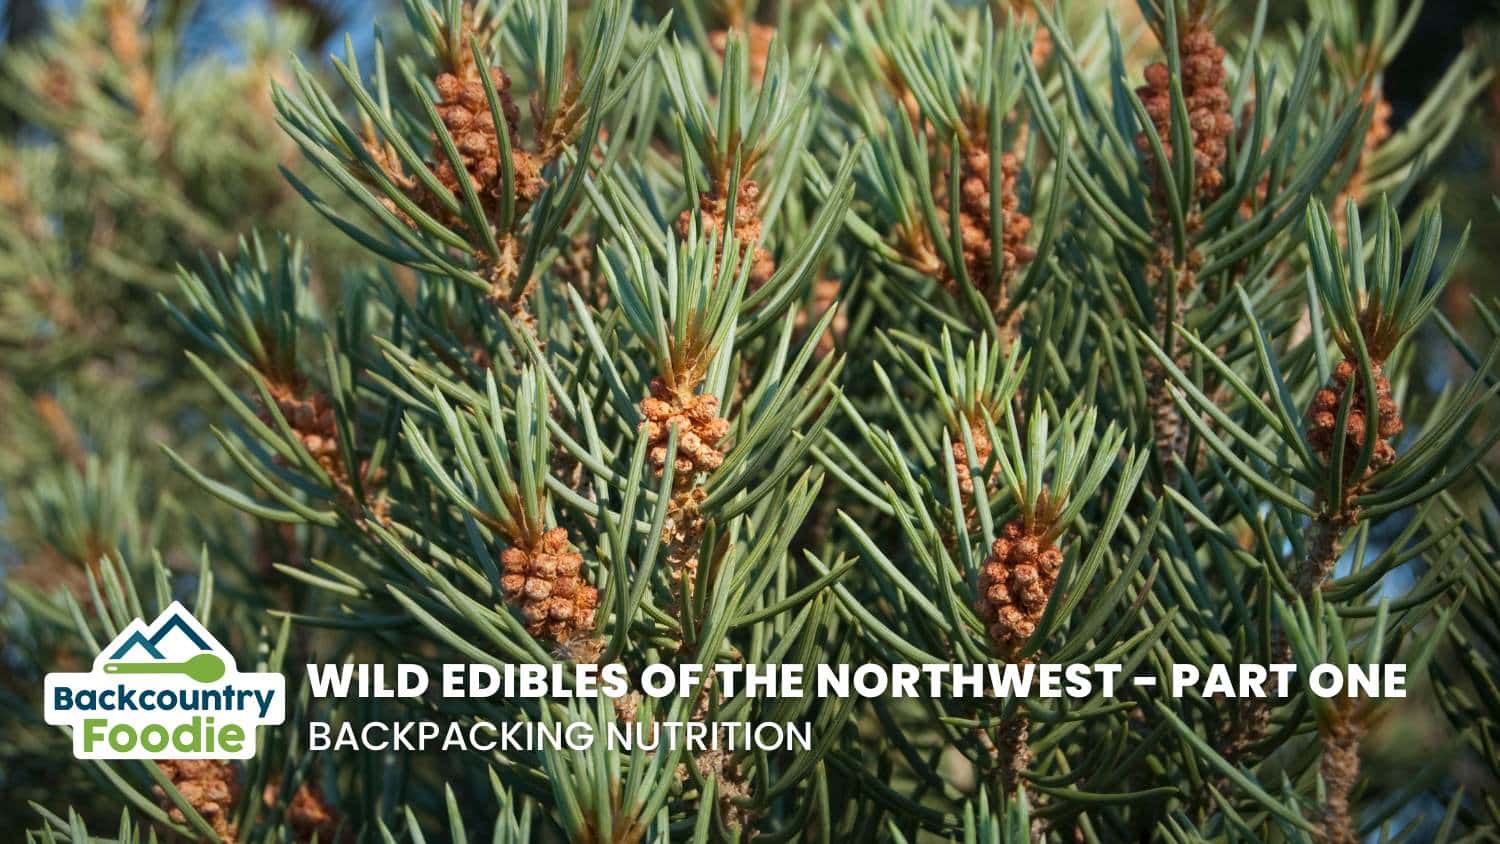 Backcountry Foodie blog Wild Edibles of the Northwest Part one thumbnail